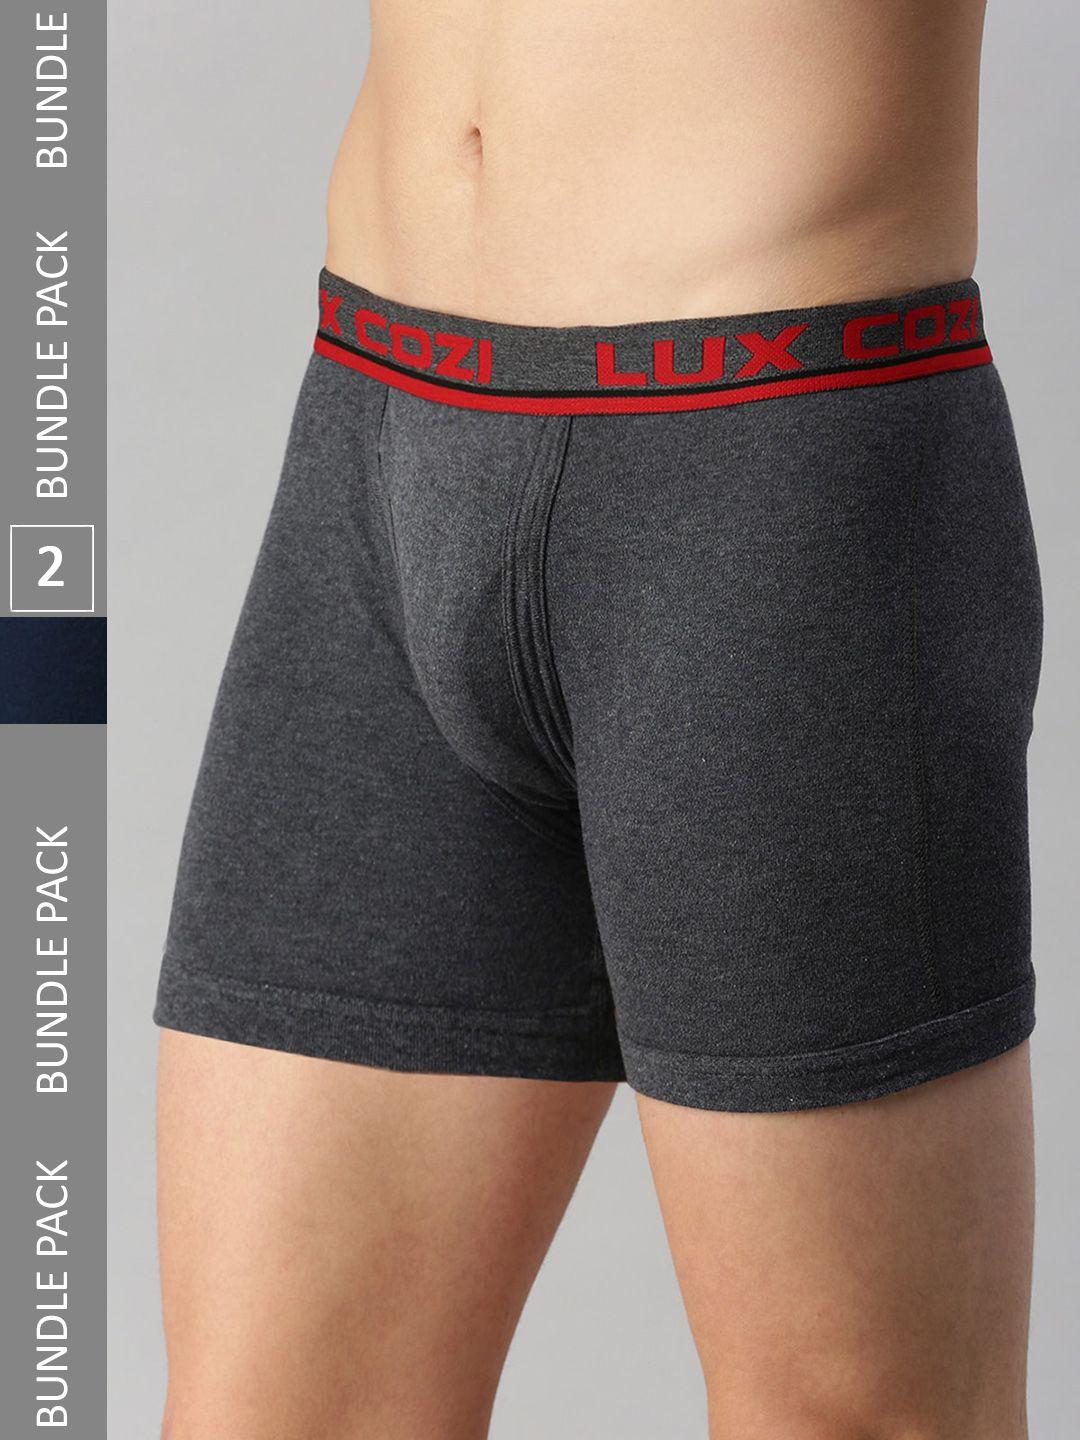 lux cozi men pack of 2 cotton outer elastic mid-rise trunks